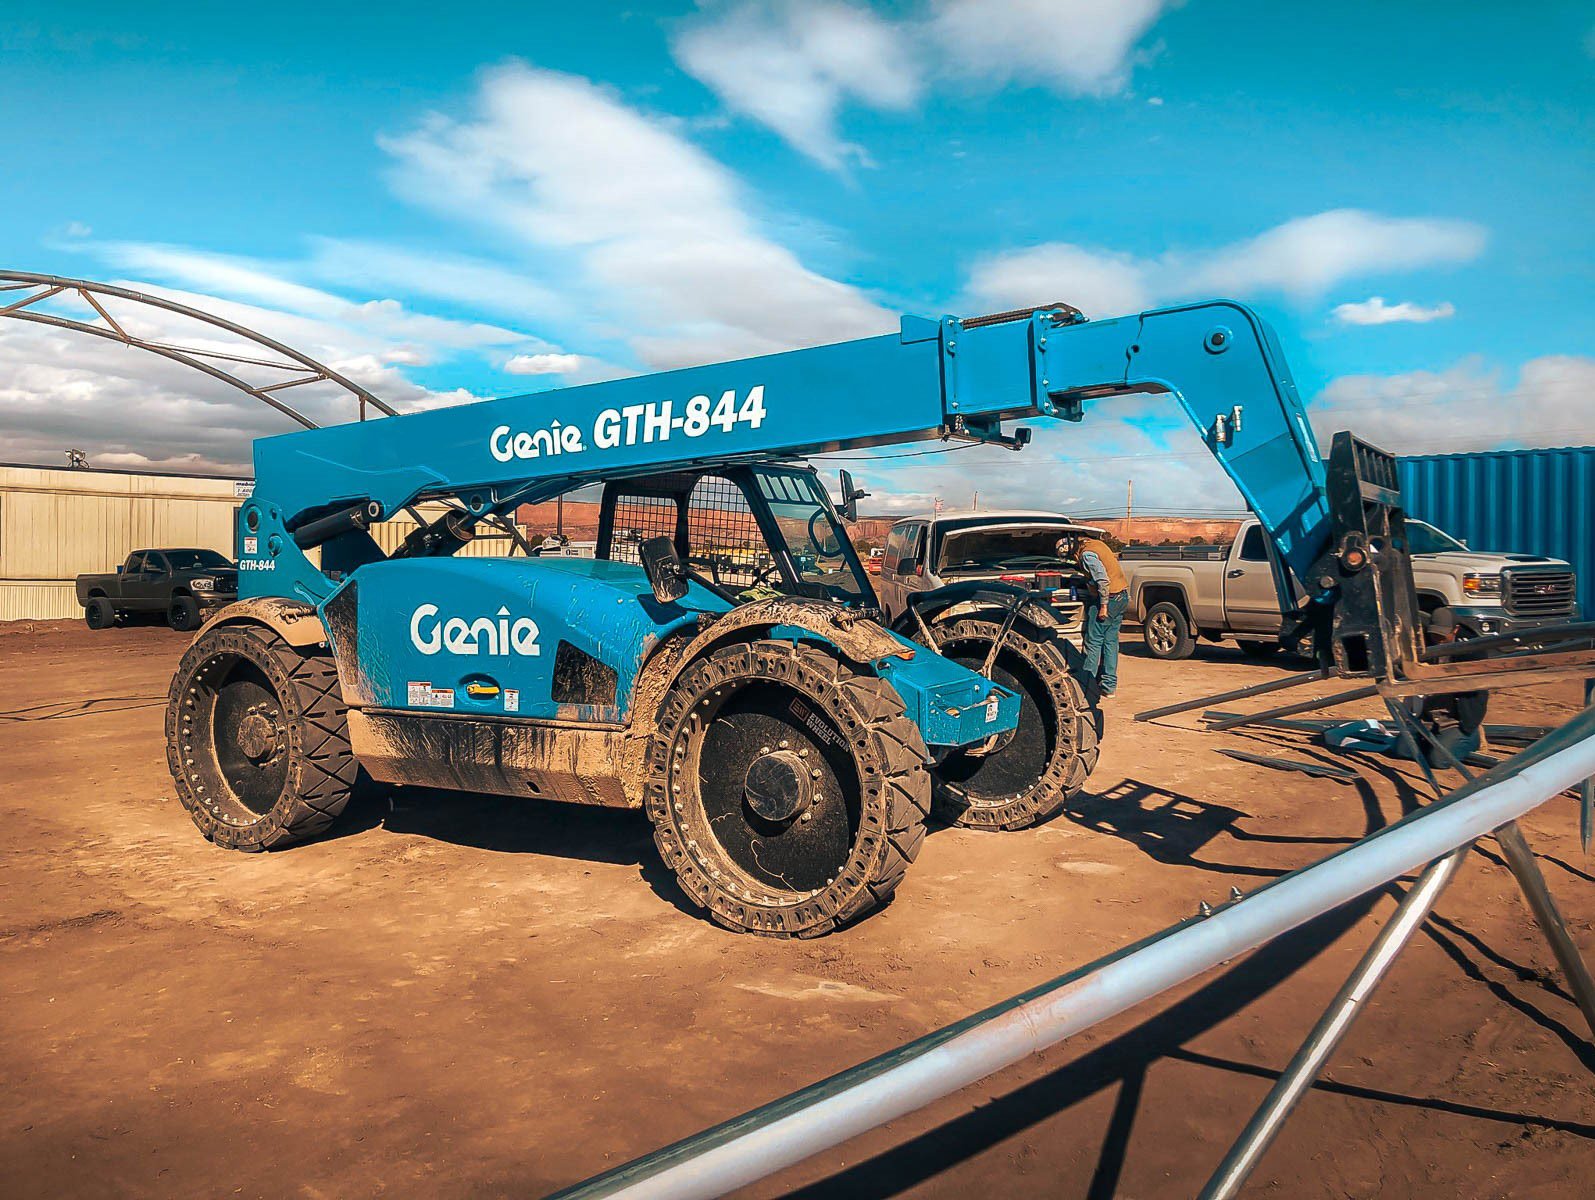 This picture shows our Gradall telehandler tires on a blue Genie telehandler